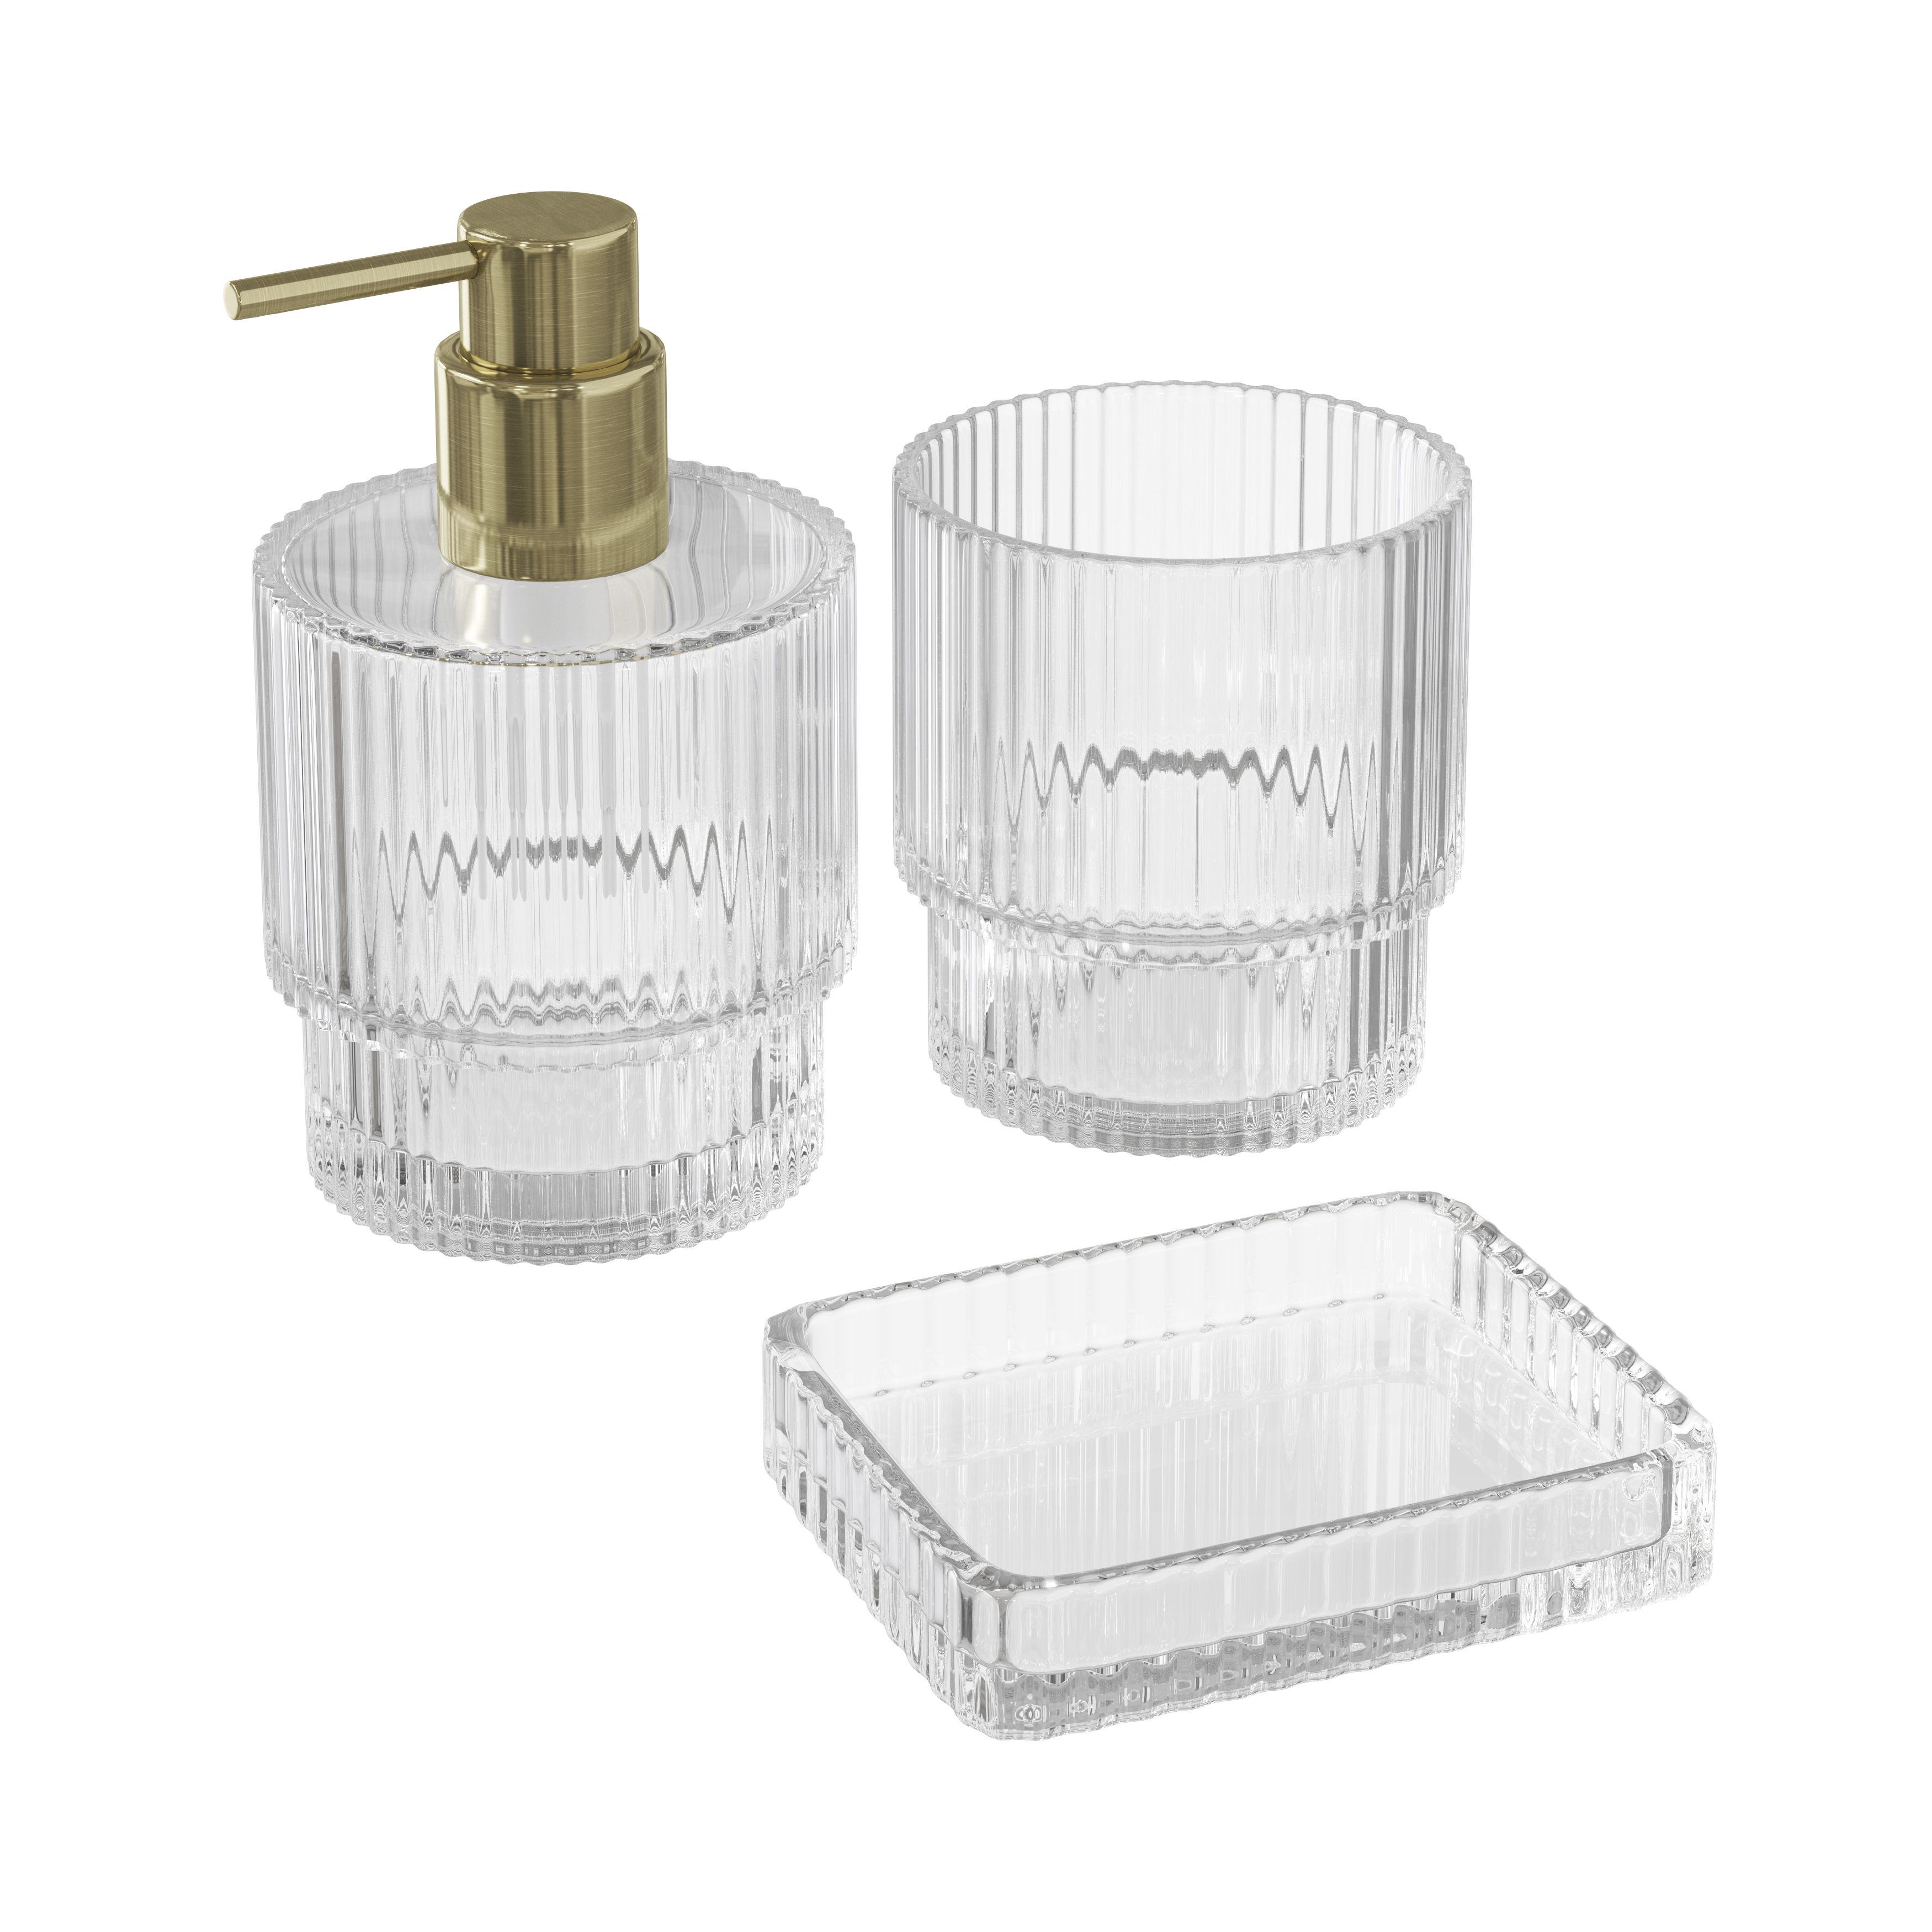 GoodHome Cavalla Transparent Ribbed effect Glass Tumbler